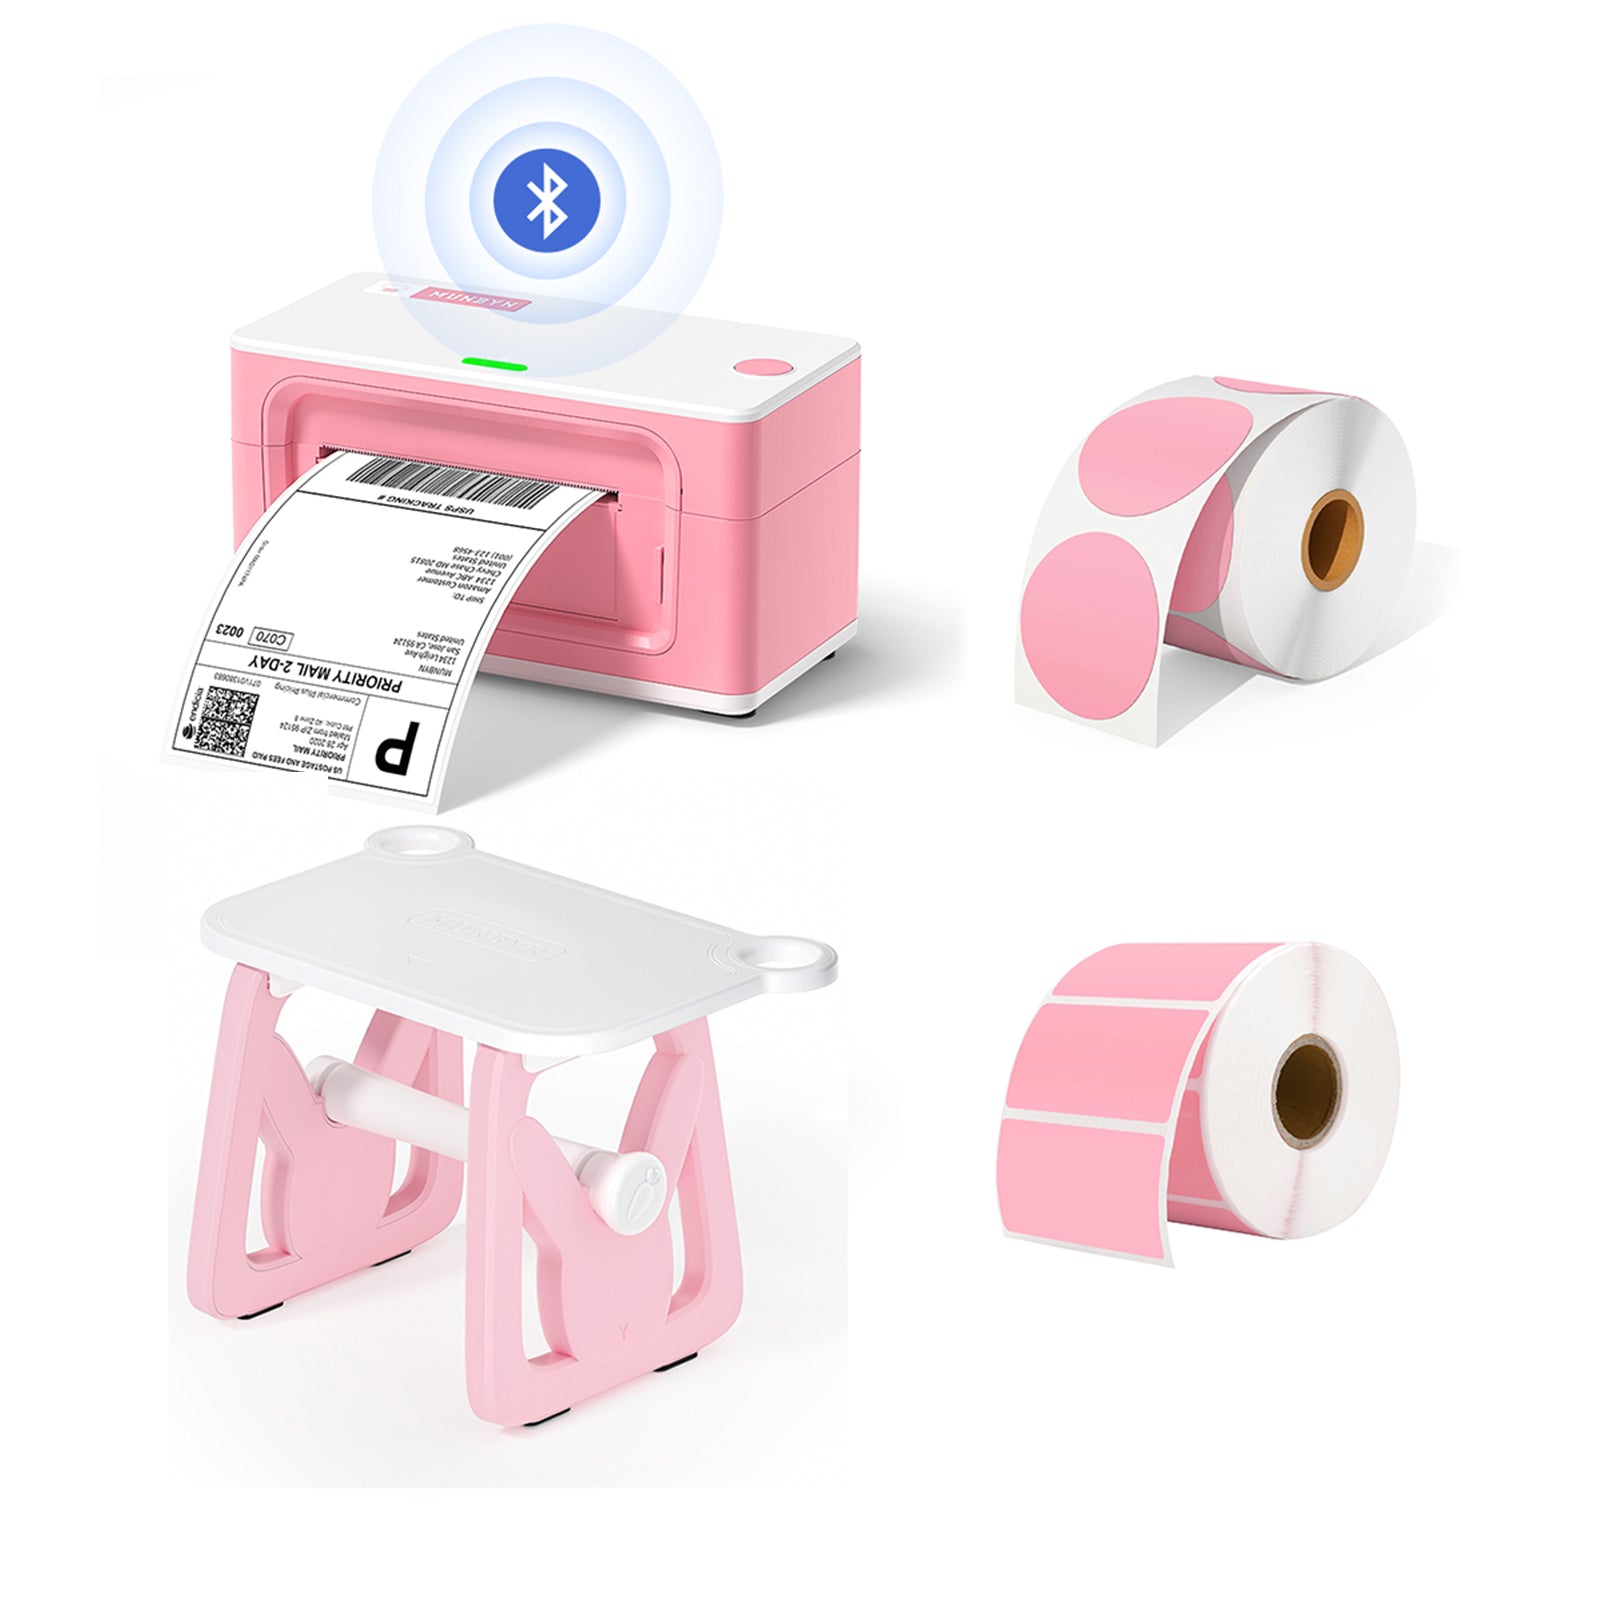 The bundle includes a Bluetooth thermal printer, a multifunctional MUNBYN pink label holder, and two rolls of thermal labels.